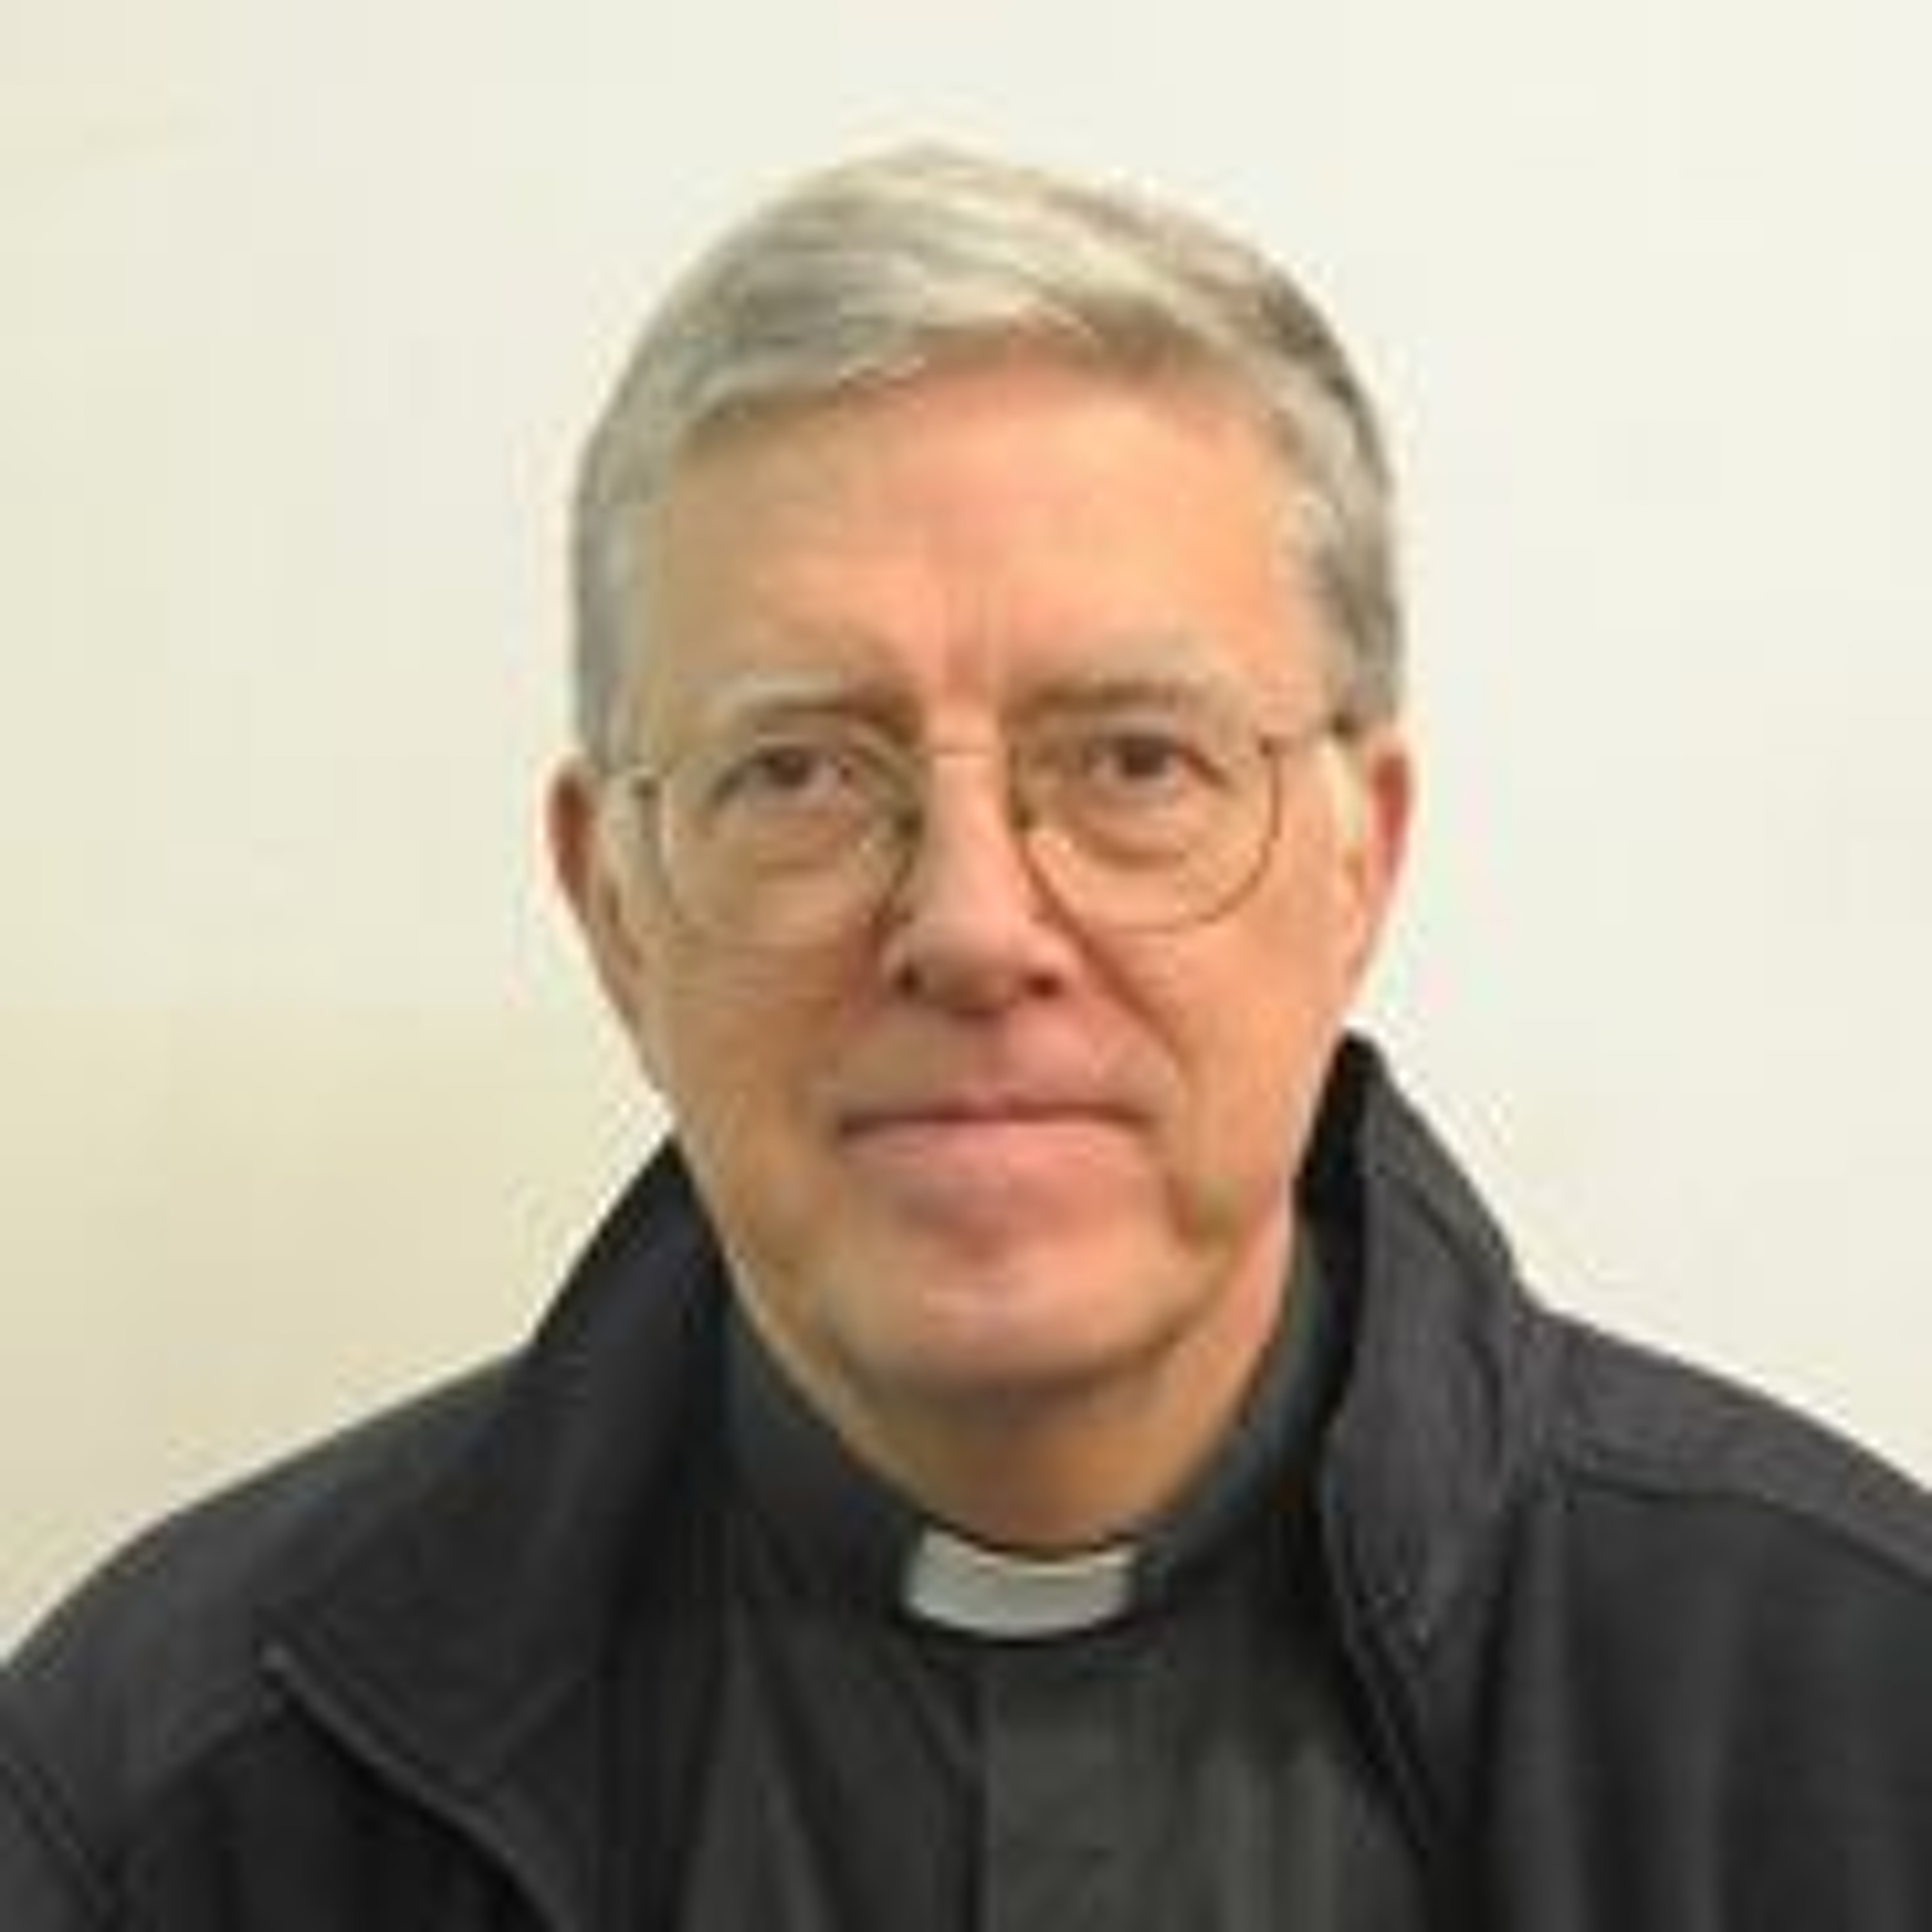 Fr. Kevin Flannery, SJ - Interview